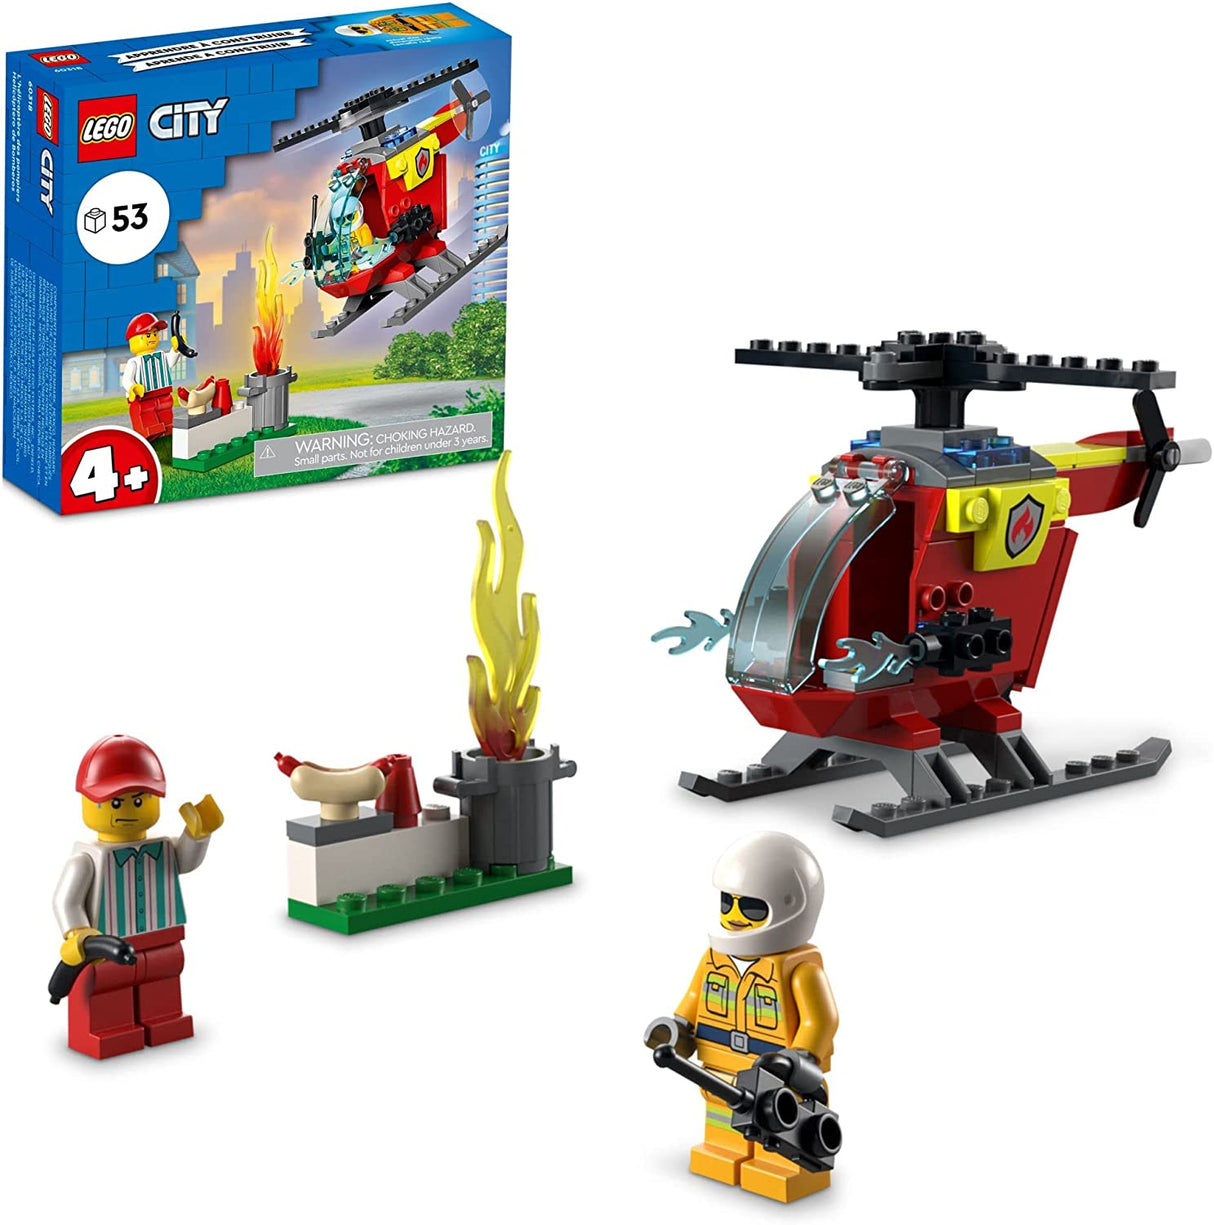 LEGO City Fire Helicopter 60318  (53 piezas)